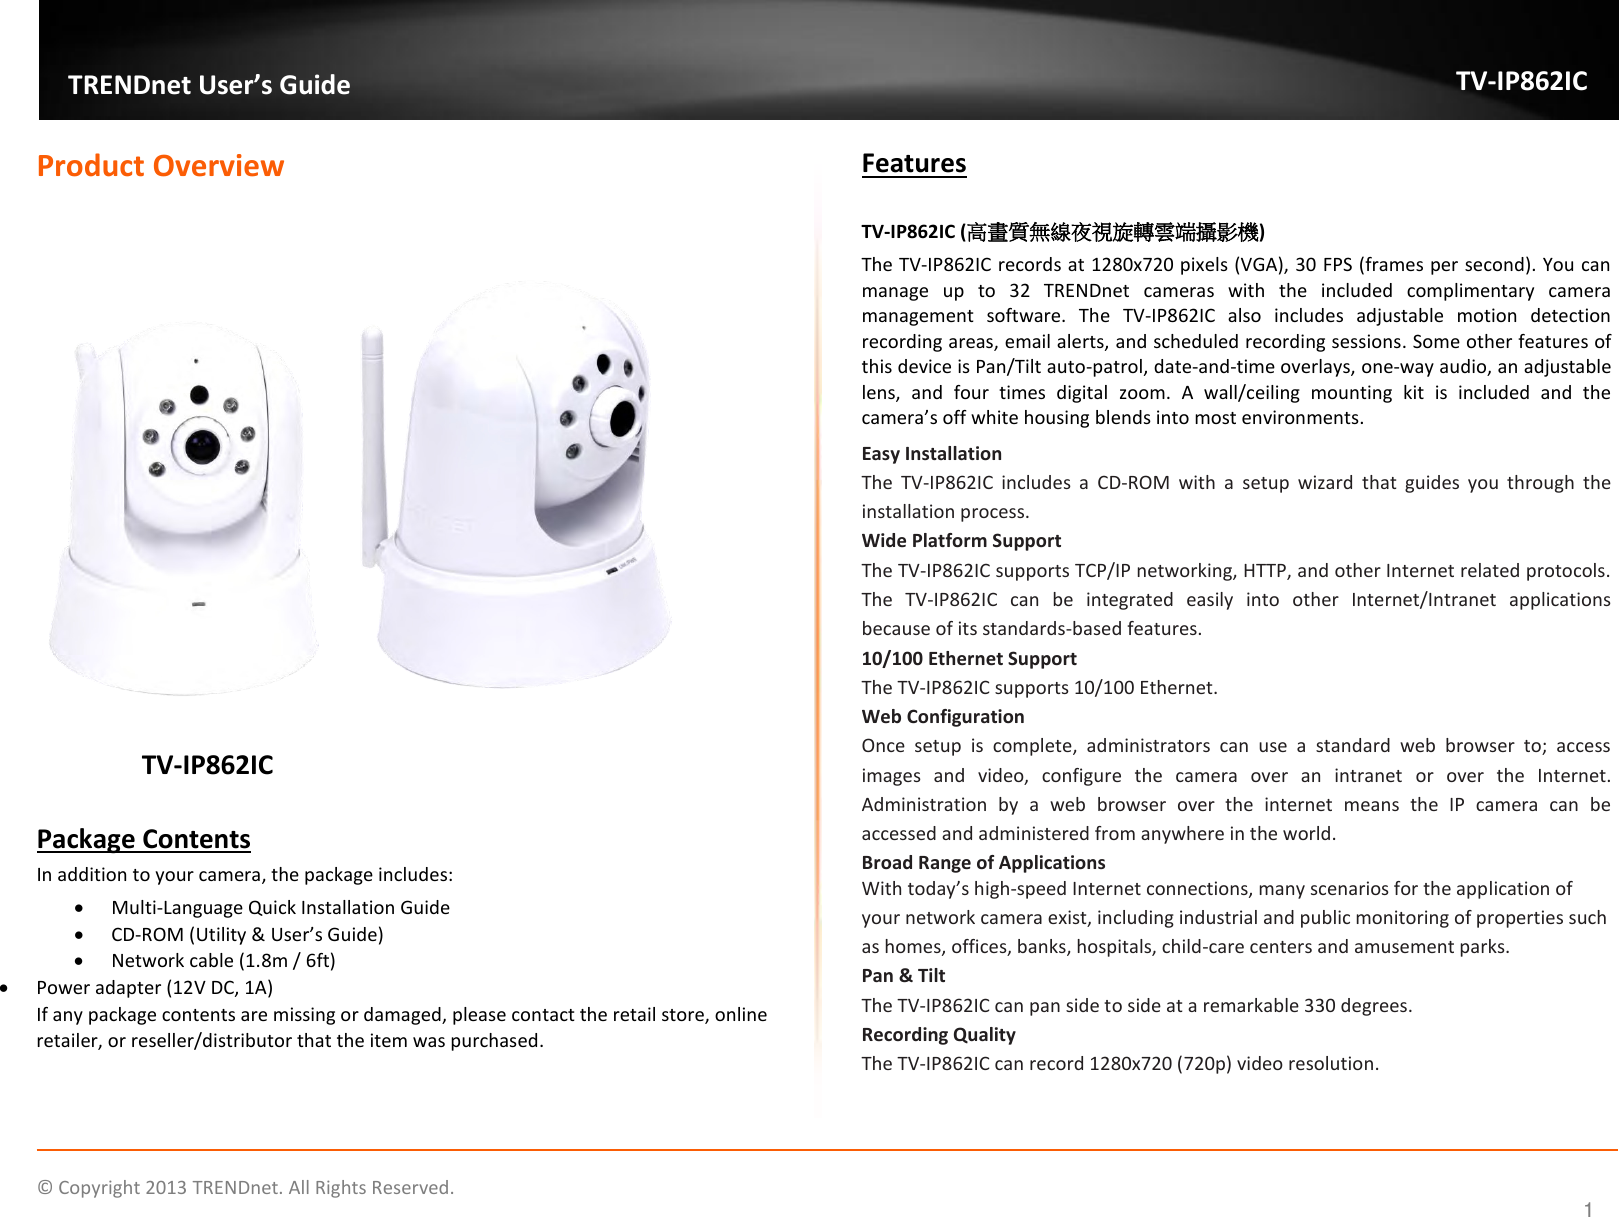                    ©  Copyright 2013 TRENDnet. All Rights Reserved.       TRENDnet User’s Guide TV-IP862IC  1 Product Overview                        TV-IP862IC    Package Contents In addition to your camera, the package includes:  Multi-Language Quick Installation Guide  CD-ROM (Utility &amp; User’s Guide)  Network cable (1.8m / 6ft)  Power adapter (12V DC, 1A) If any package contents are missing or damaged, please contact the retail store, online retailer, or reseller/distributor that the item was purchased. Features  TV-IP862IC (高畫質無線夜視旋轉雲端攝影機) The TV-IP862IC records at 1280x720 pixels (VGA), 30 FPS (frames per second). You can manage  up  to  32  TRENDnet  cameras  with  the  included  complimentary  camera management  software.  The  TV-IP862IC  also  includes  adjustable  motion  detection recording areas, email alerts, and scheduled recording sessions. Some other features of this device is Pan/Tilt auto-patrol, date-and-time overlays, one-way audio, an adjustable lens,  and  four  times  digital  zoom.  A  wall/ceiling  mounting  kit  is  included  and  the camera’s off white housing blends into most environments. Easy Installation  The  TV-IP862IC  includes  a  CD-ROM  with  a  setup  wizard  that  guides  you  through  the installation process.  Wide Platform Support  The TV-IP862IC supports TCP/IP networking, HTTP, and other Internet related protocols. The  TV-IP862IC  can  be  integrated  easily  into  other  Internet/Intranet  applications because of its standards-based features.  10/100 Ethernet Support  The TV-IP862IC supports 10/100 Ethernet.  Web Configuration  Once  setup  is  complete,  administrators  can  use  a  standard  web  browser  to;  access images  and  video,  configure  the  camera  over  an  intranet  or  over  the  Internet. Administration  by  a  web  browser  over  the  internet  means  the  IP  camera  can  be accessed and administered from anywhere in the world.  Broad Range of Applications  With today’s high-speed Internet connections, many scenarios for the application of your network camera exist, including industrial and public monitoring of properties such as homes, offices, banks, hospitals, child-care centers and amusement parks. Pan &amp; Tilt The TV-IP862IC can pan side to side at a remarkable 330 degrees. Recording Quality The TV-IP862IC can record 1280x720 (720p) video resolution.   